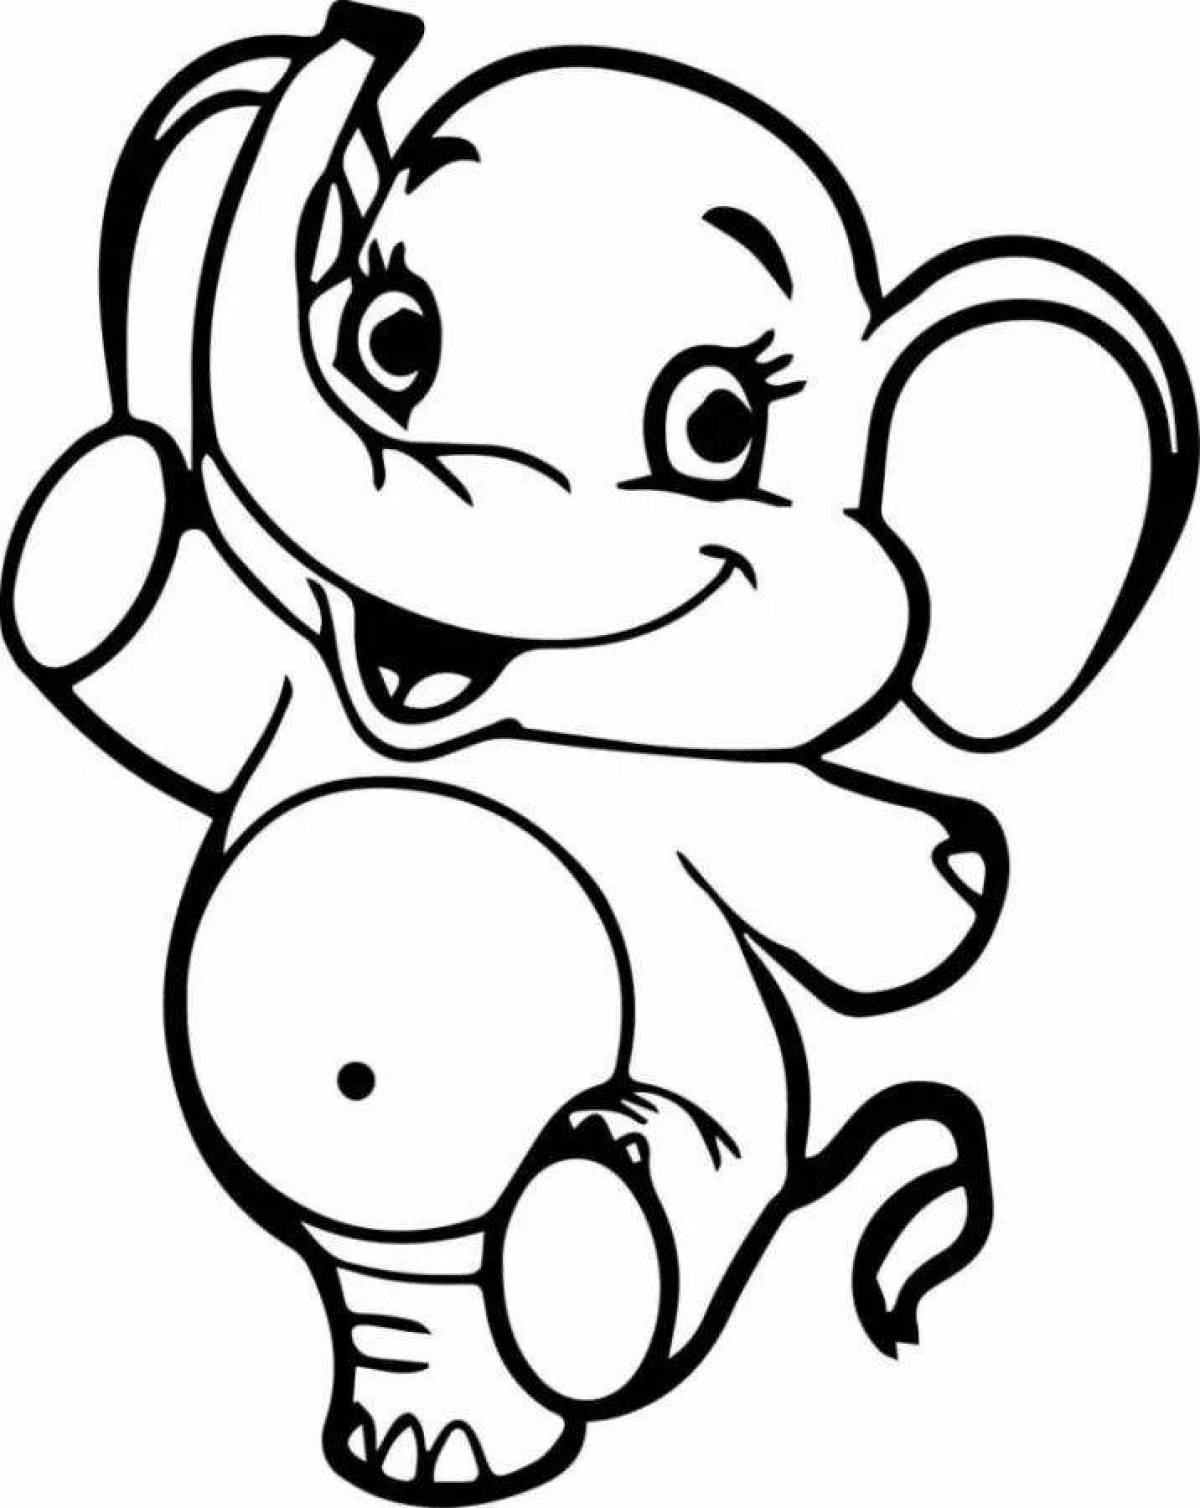 Fancy pink elephant coloring page